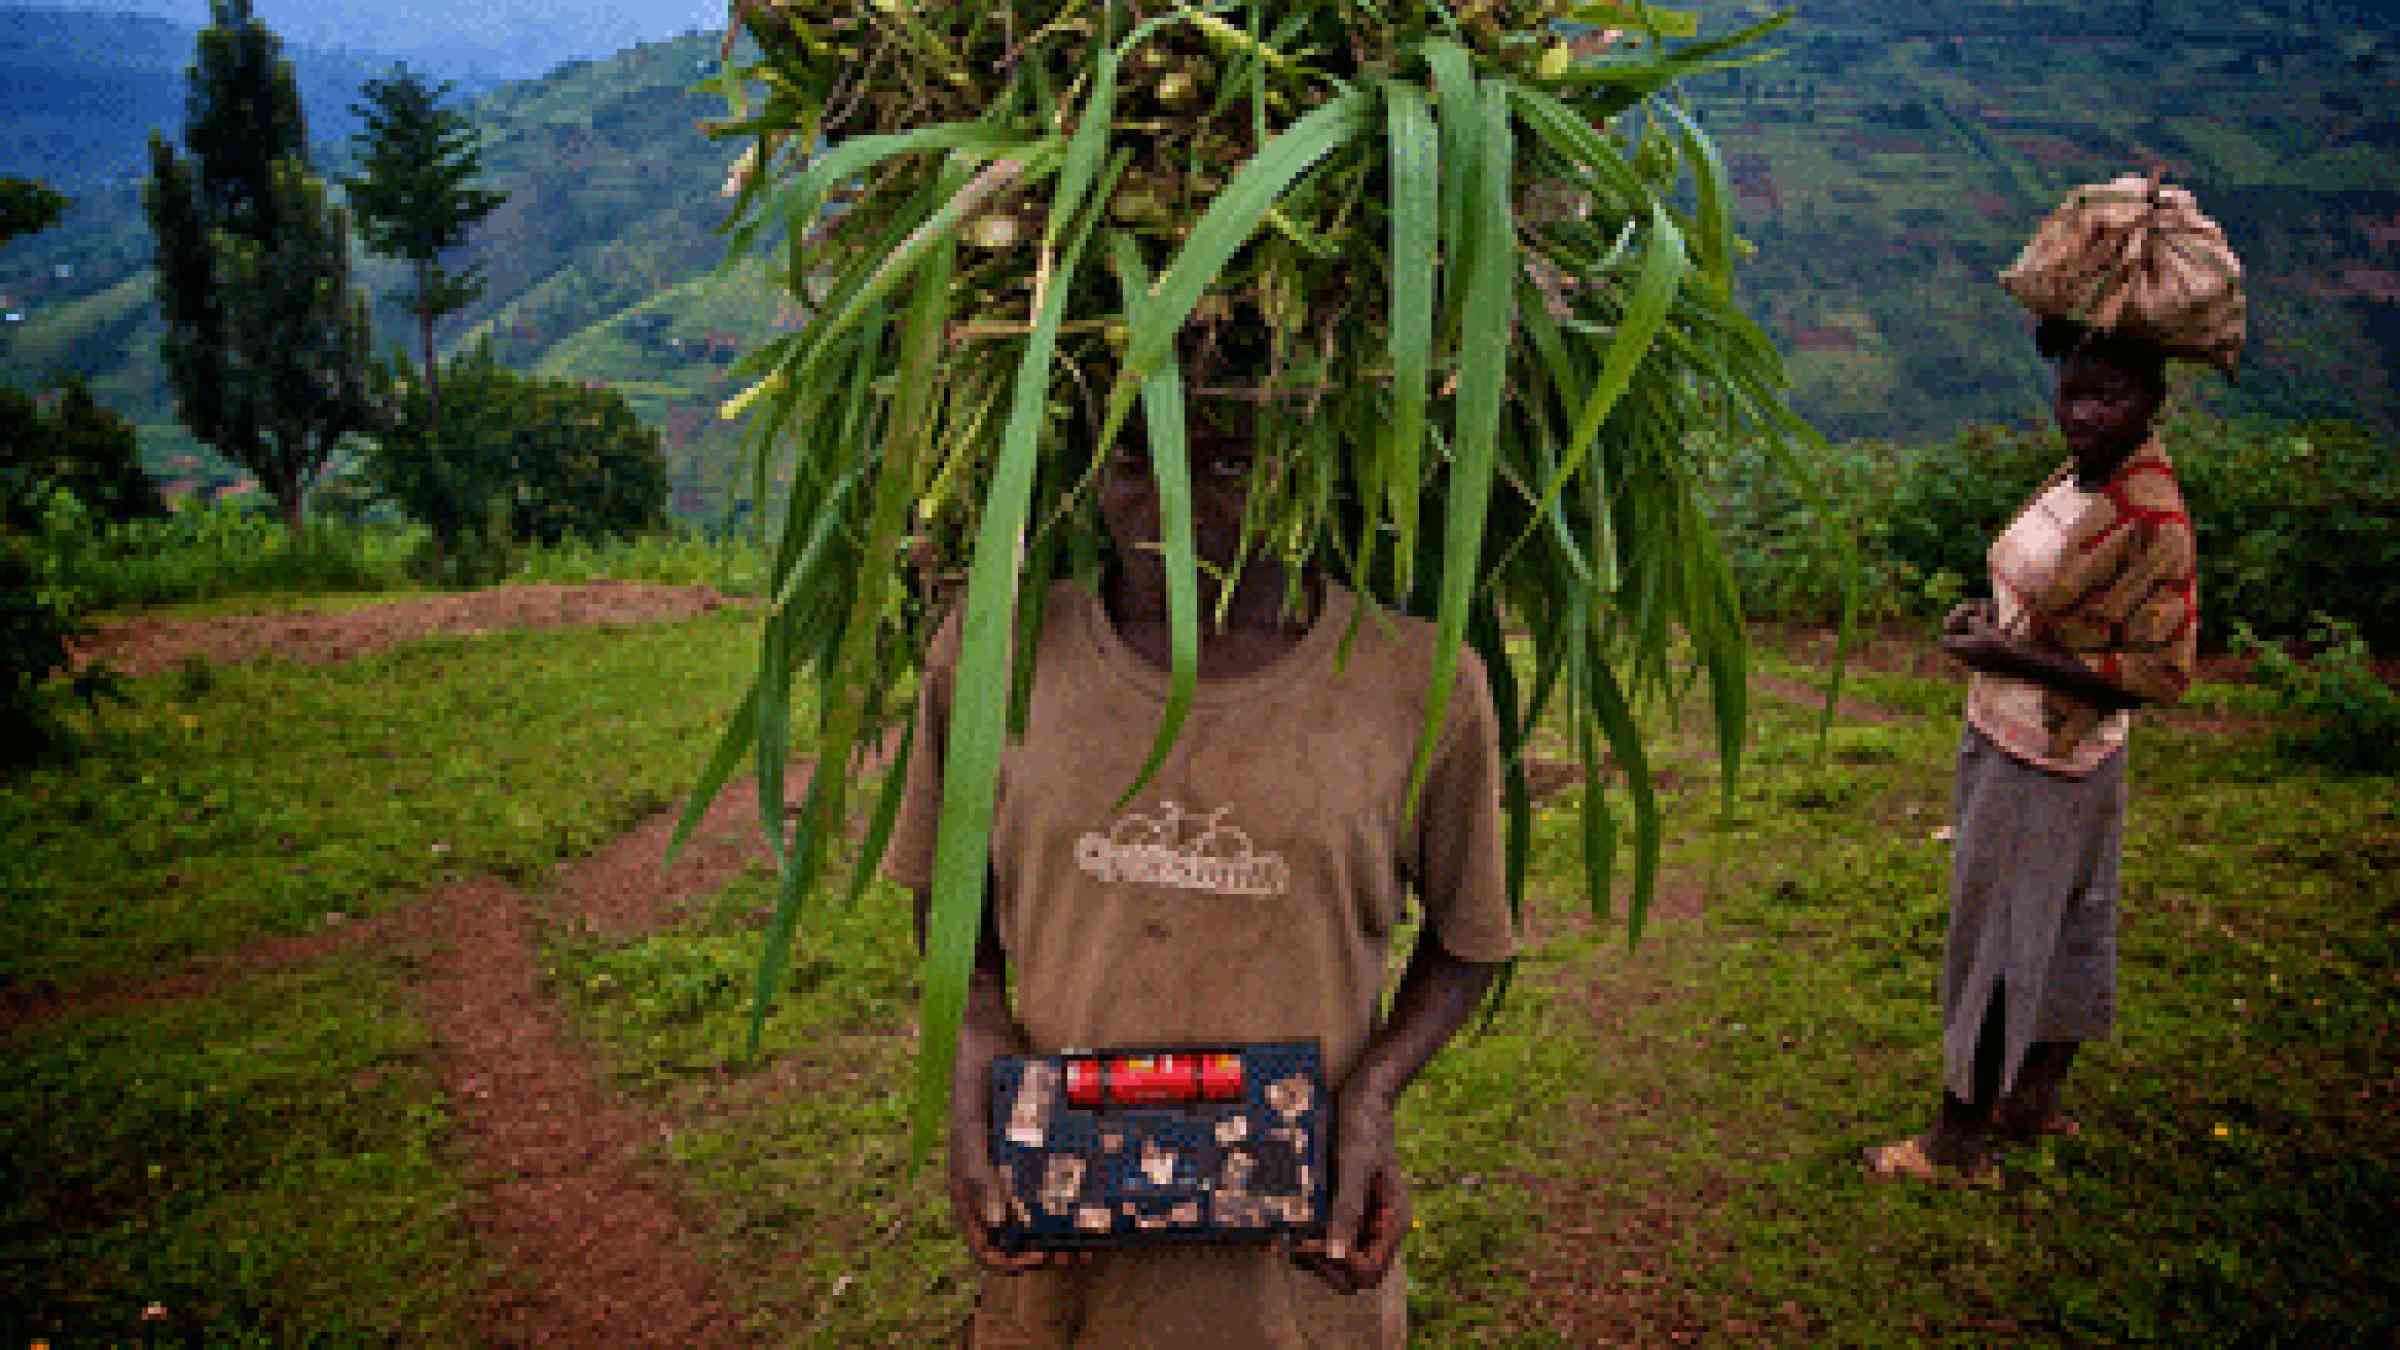 Photo by  Graham Holliday, Flickr user noodlepie: Listening to the radio on a mountain in Rwanda  Bumped into this guy halfway up a mountain in Gicumbi province in northern Rwanda. Carrying cattle feed on his head and listening to the radio in his hands. Read more about this part of Rwanda and gold exploration in the area kigaliwire.com/2011/12/07/hunting-for-gold-in-rwanda/ CC BY-NC 2.0, https://www.flickr.com/photos/noodlepie/6465765237